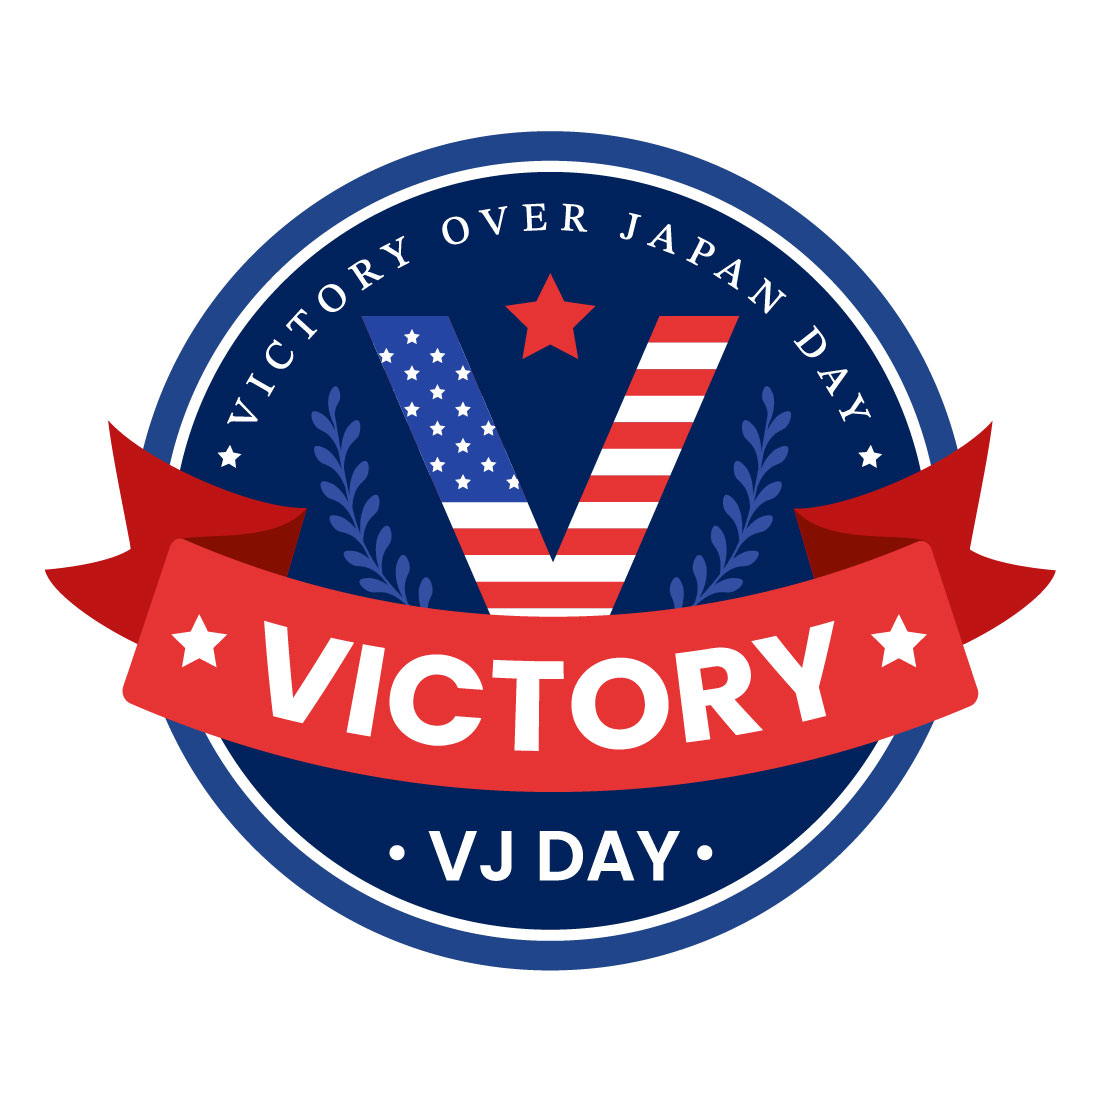 12 Victory Over Japan Day Illustration preview image.